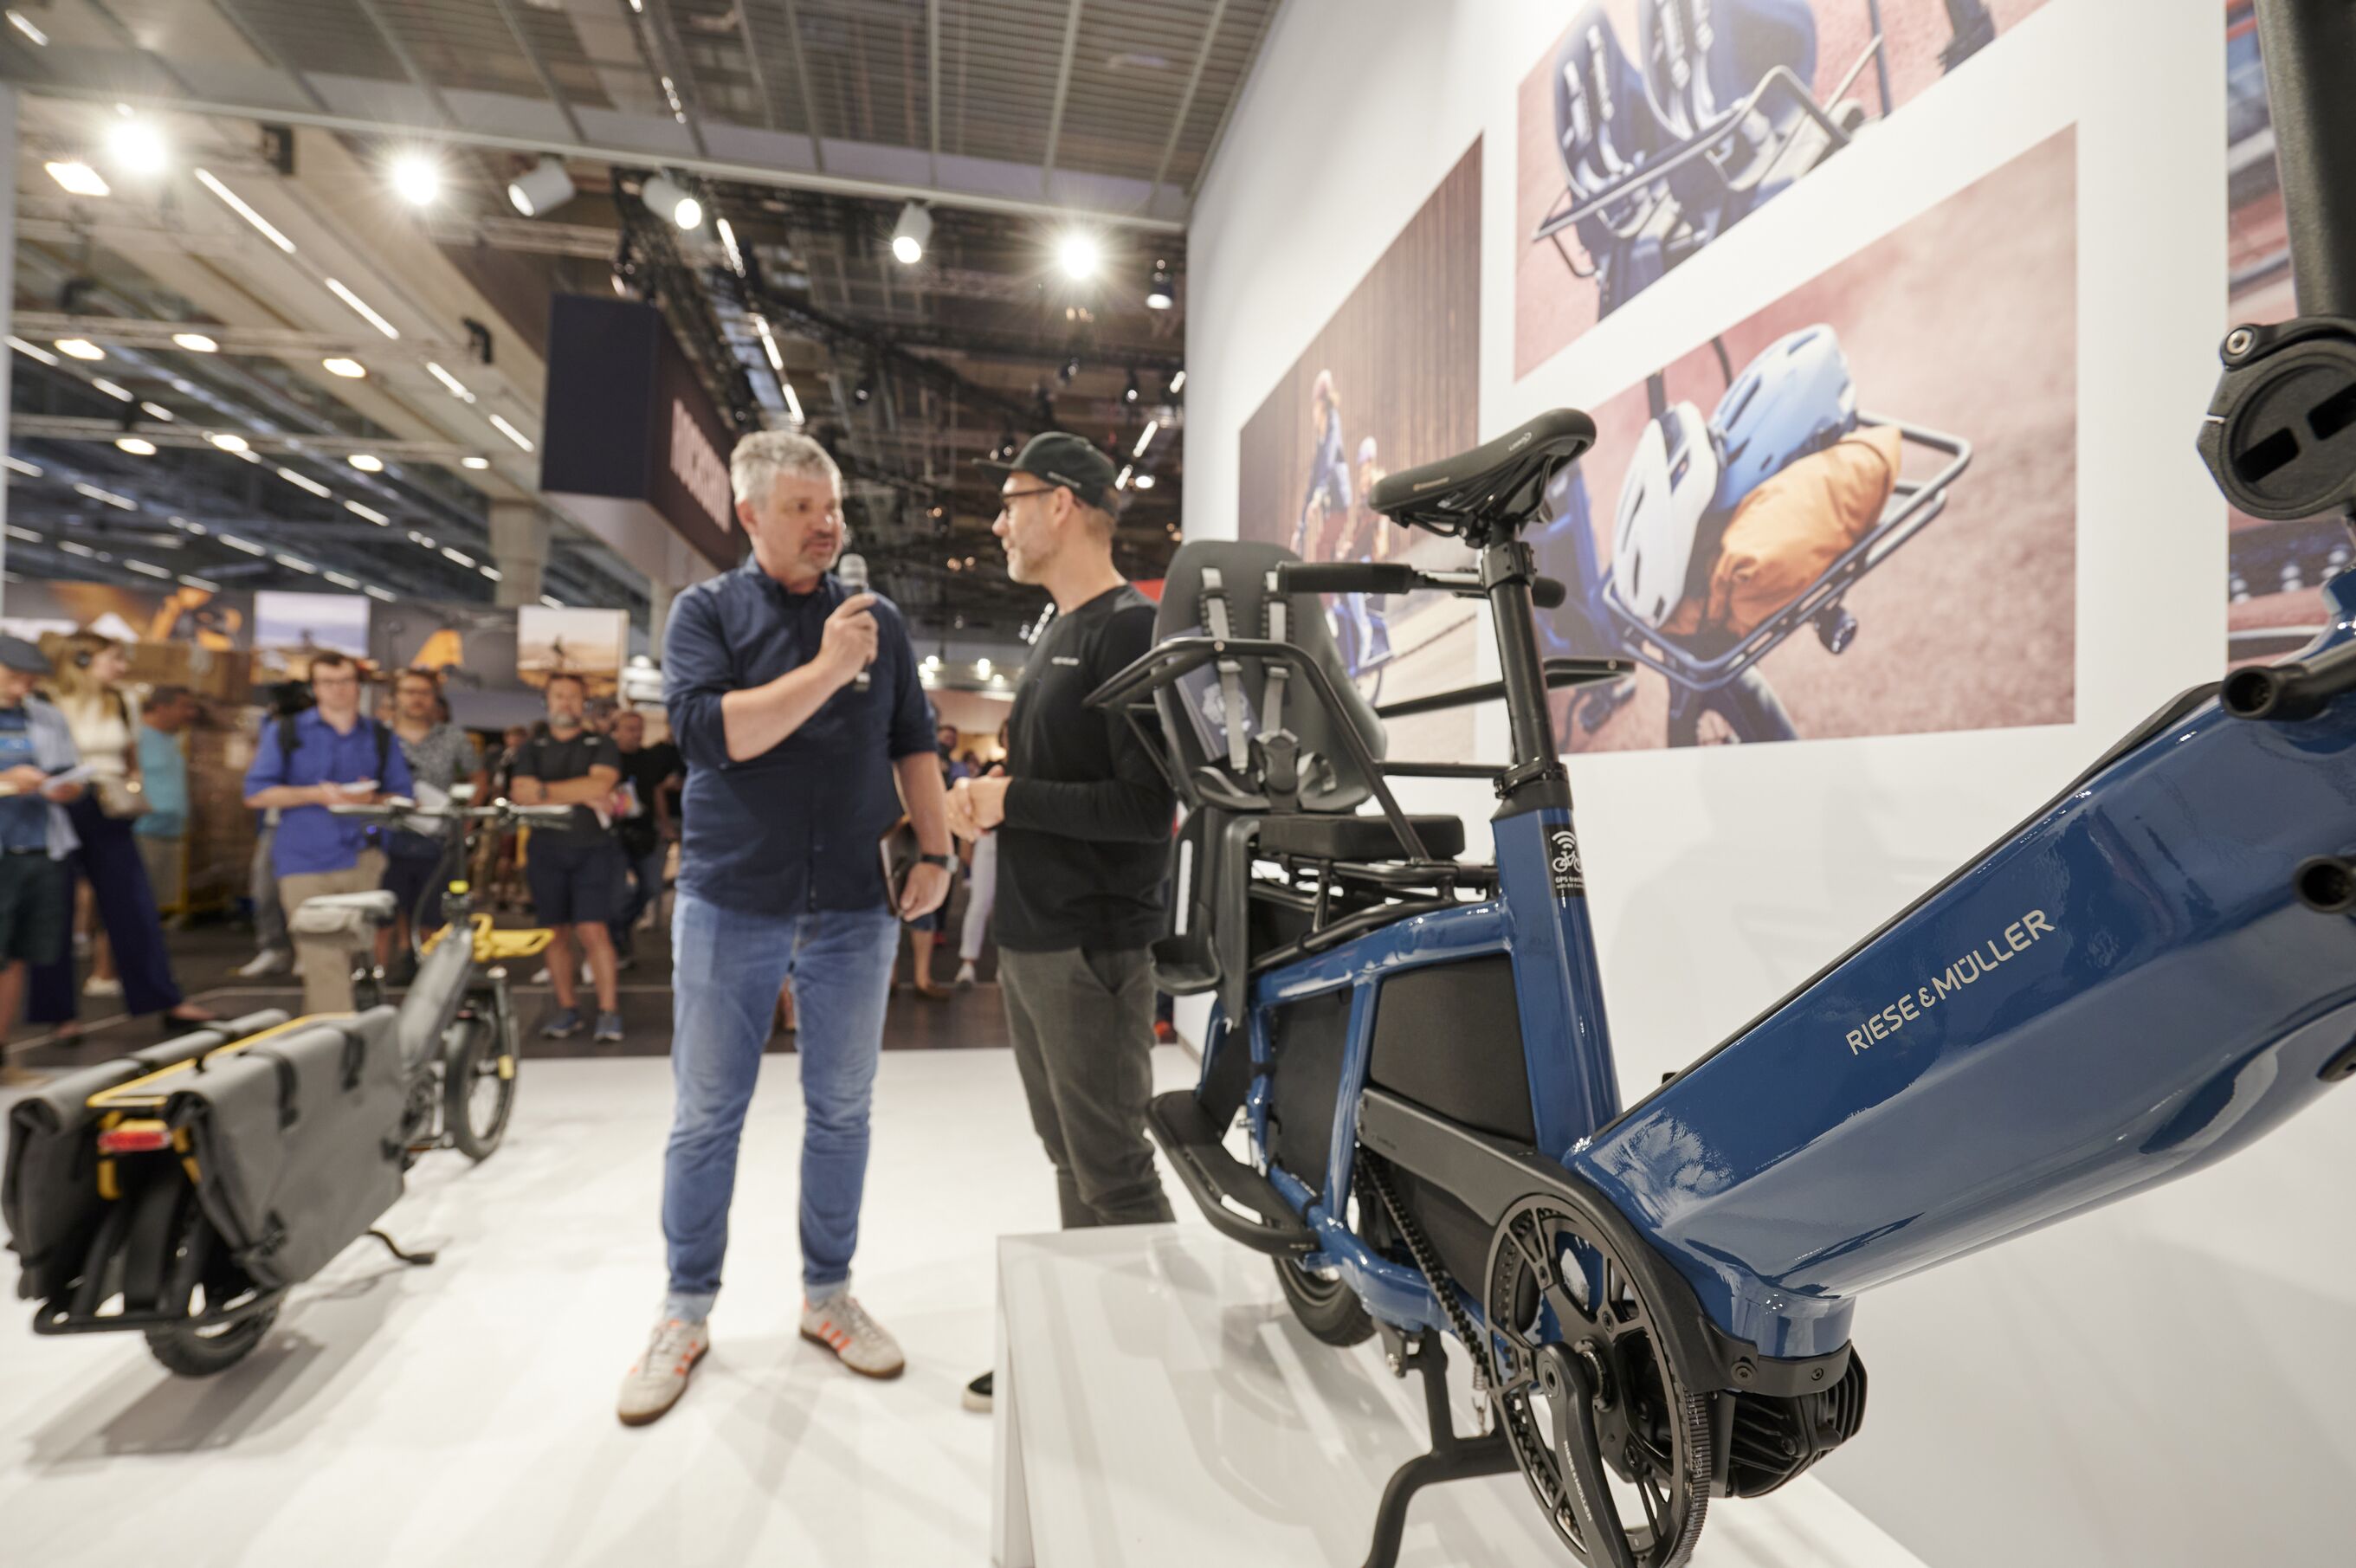 Riese&Müller Bike-Abo Halle 12.0 Stand A13